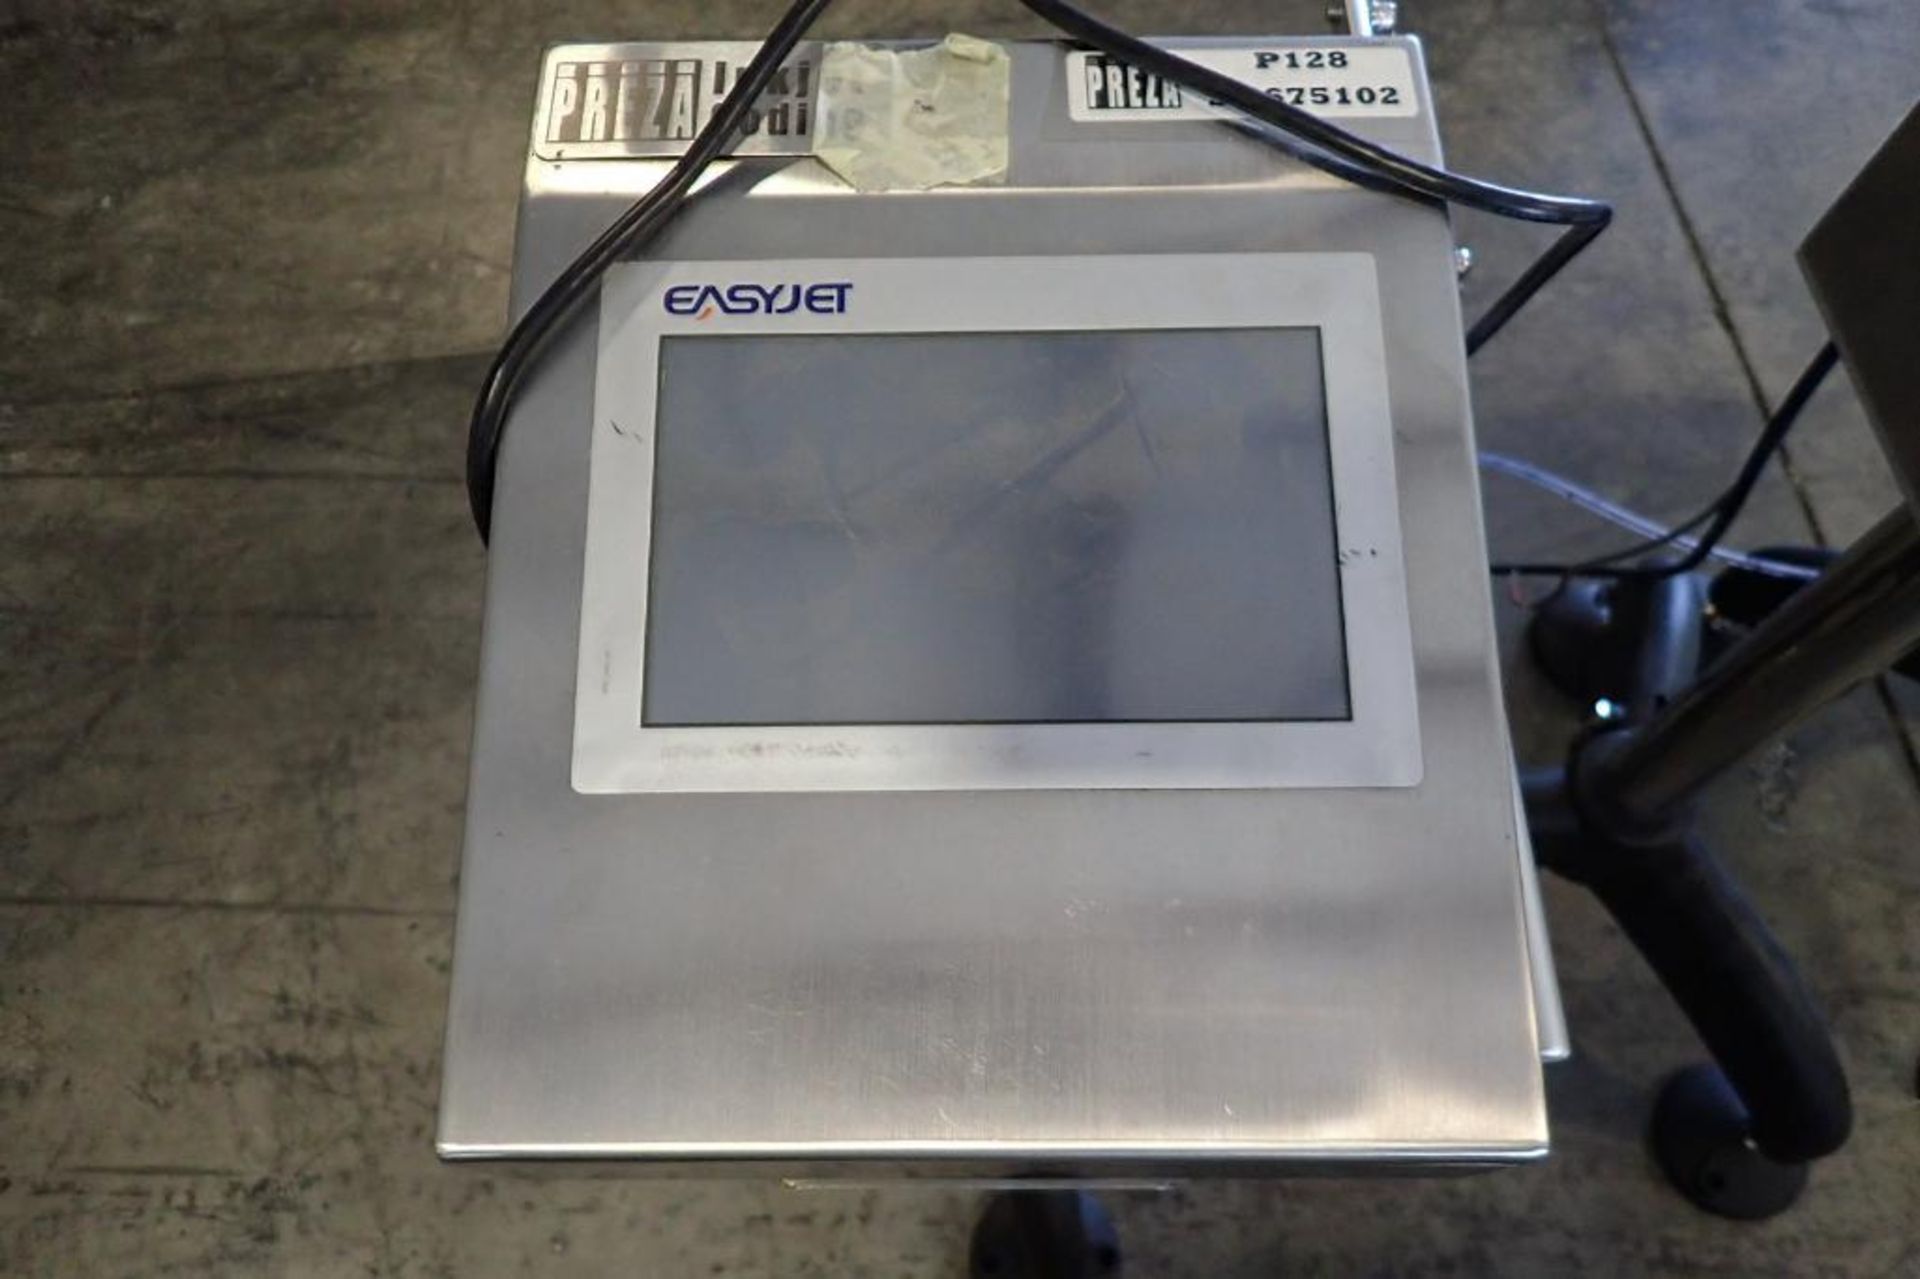 Preza easyjet ink jet coder, Model P128, touch screen, only 1 has ink head, adjustable stands { - Image 2 of 12